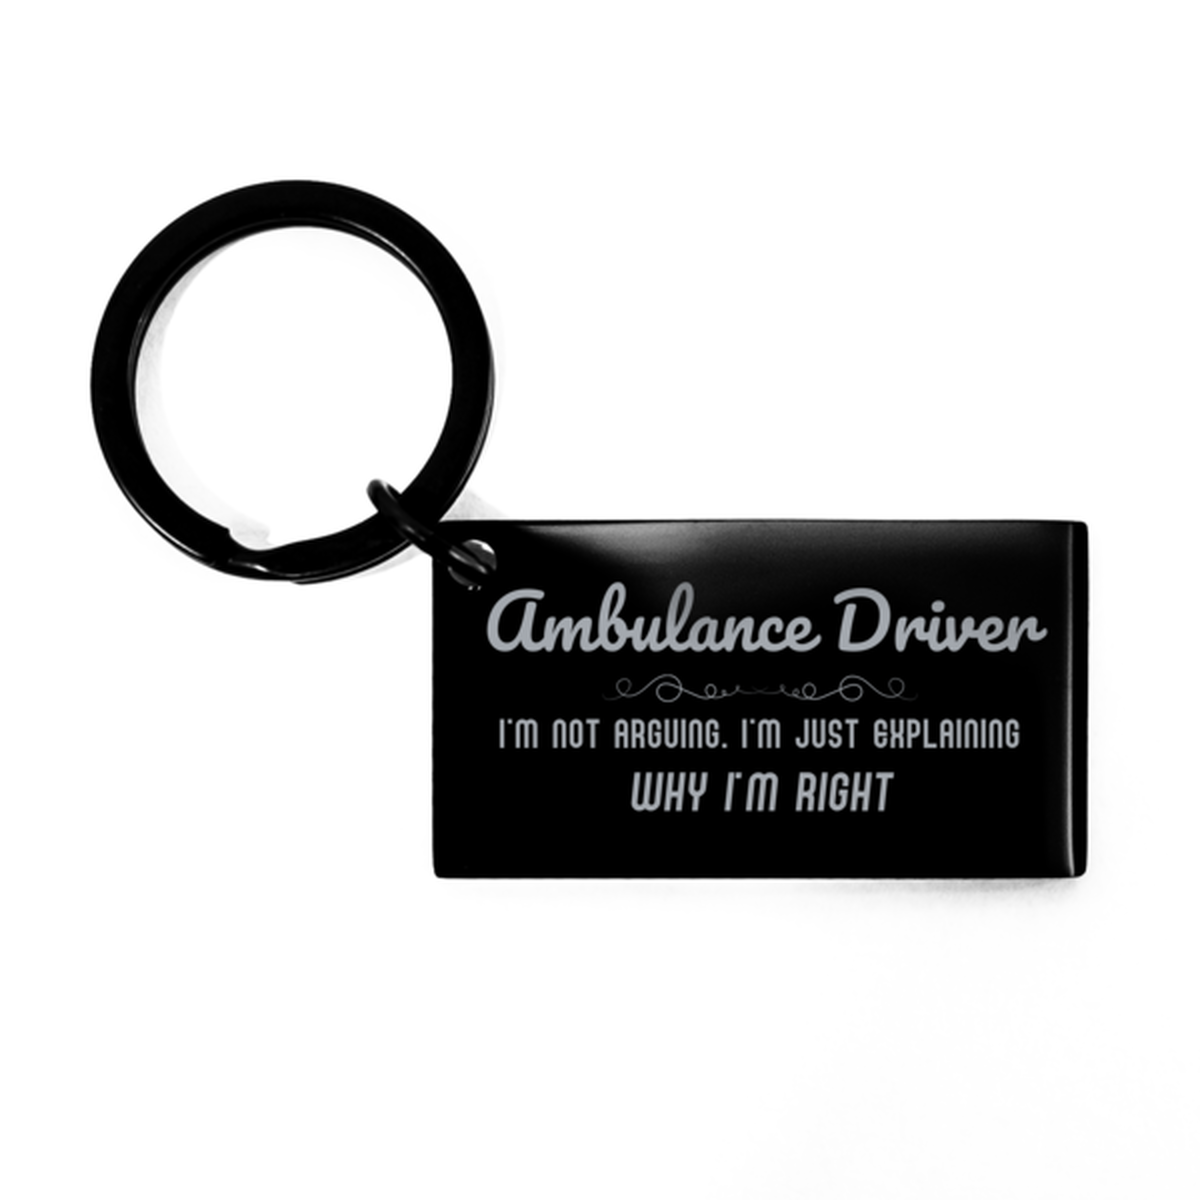 Ambulance Driver I'm not Arguing. I'm Just Explaining Why I'm RIGHT Keychain, Funny Saying Quote Ambulance Driver Gifts For Ambulance Driver Graduation Birthday Christmas Gifts for Men Women Coworker